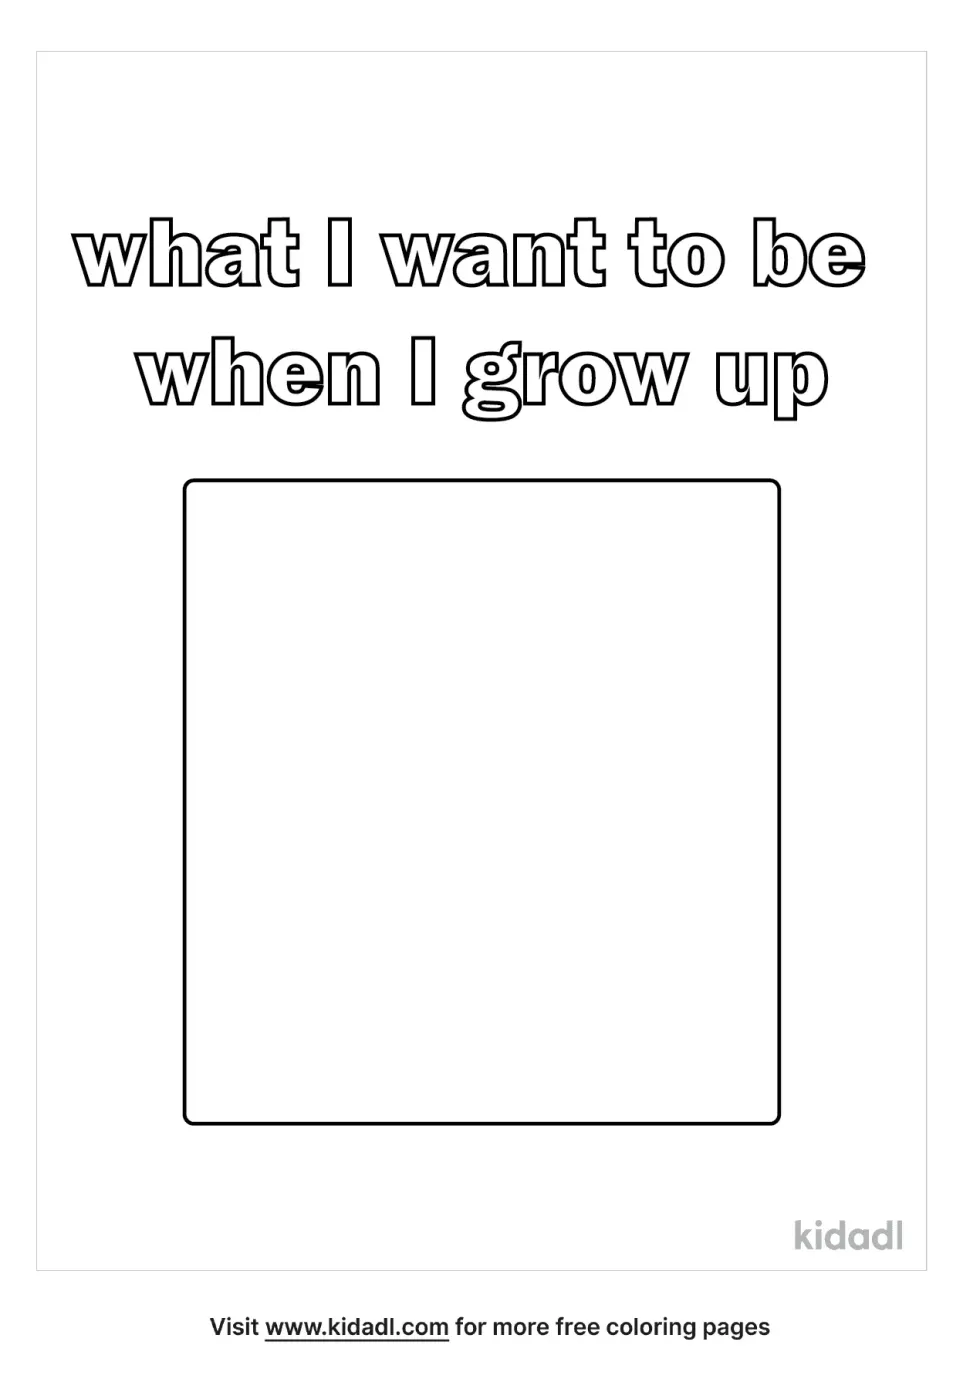 Kindergarten What I Want To Be When I Grow Up Coloring Page